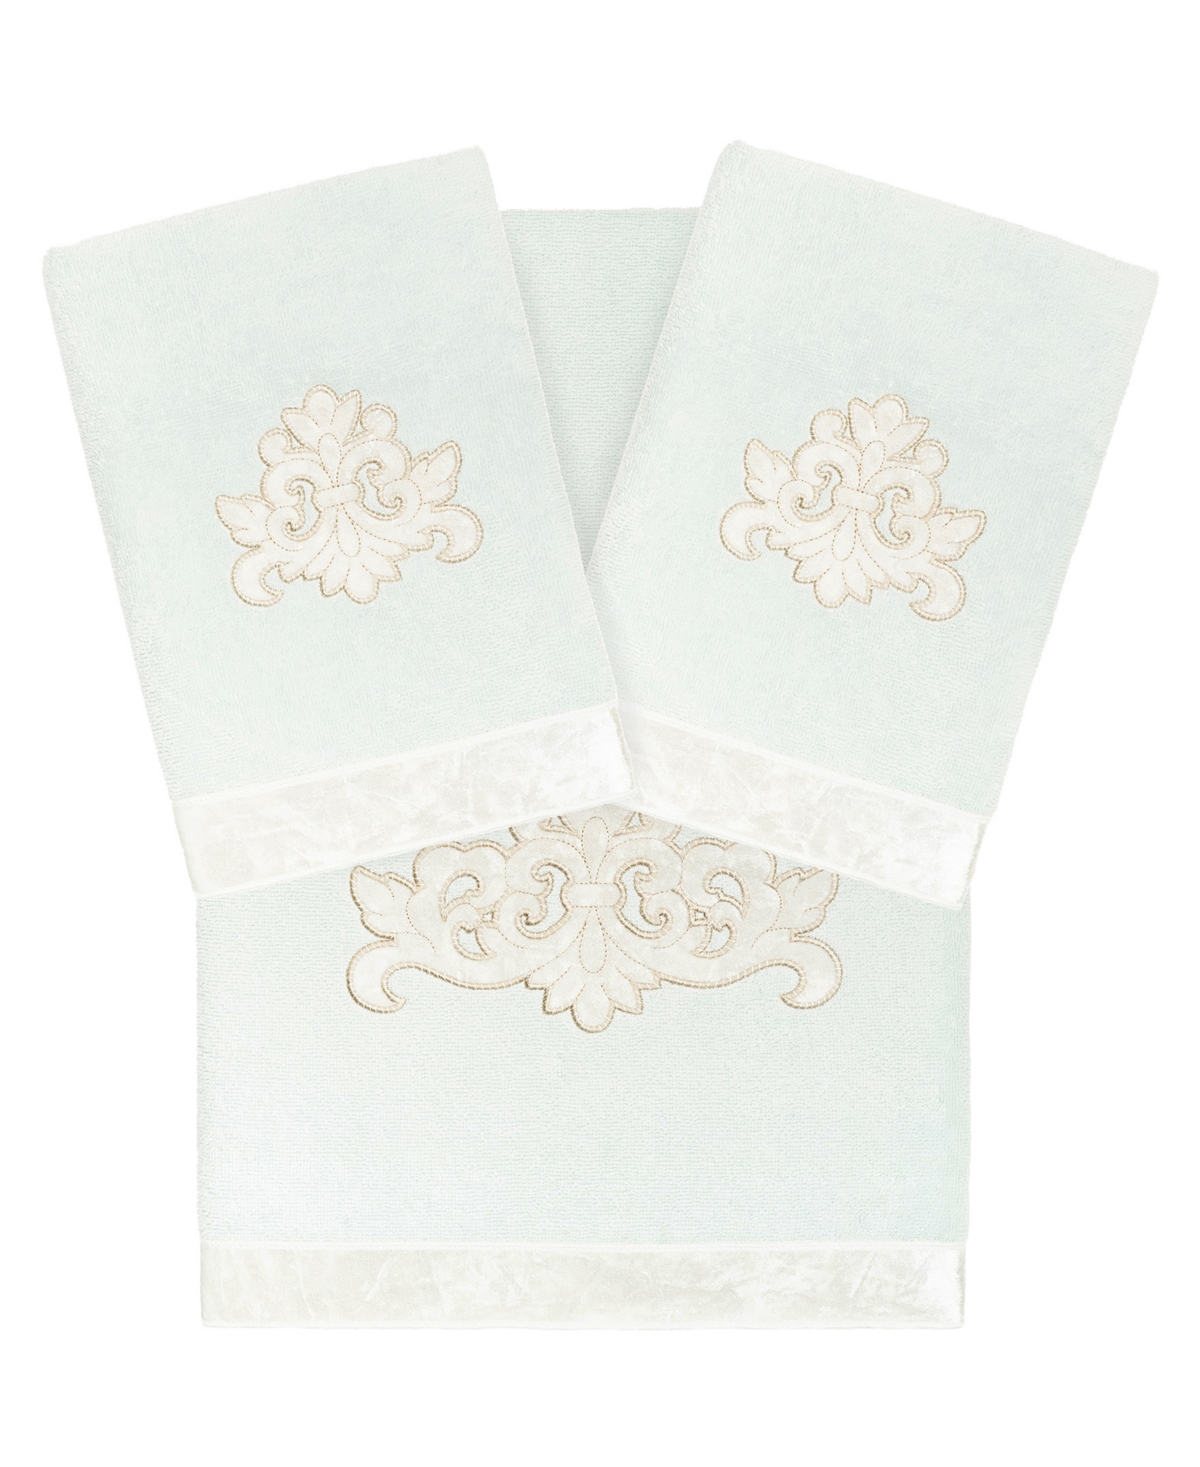 Linum Home Textiles Turkish Cotton May Embellished Towel Set, 3 Piece Bedding In Aqua